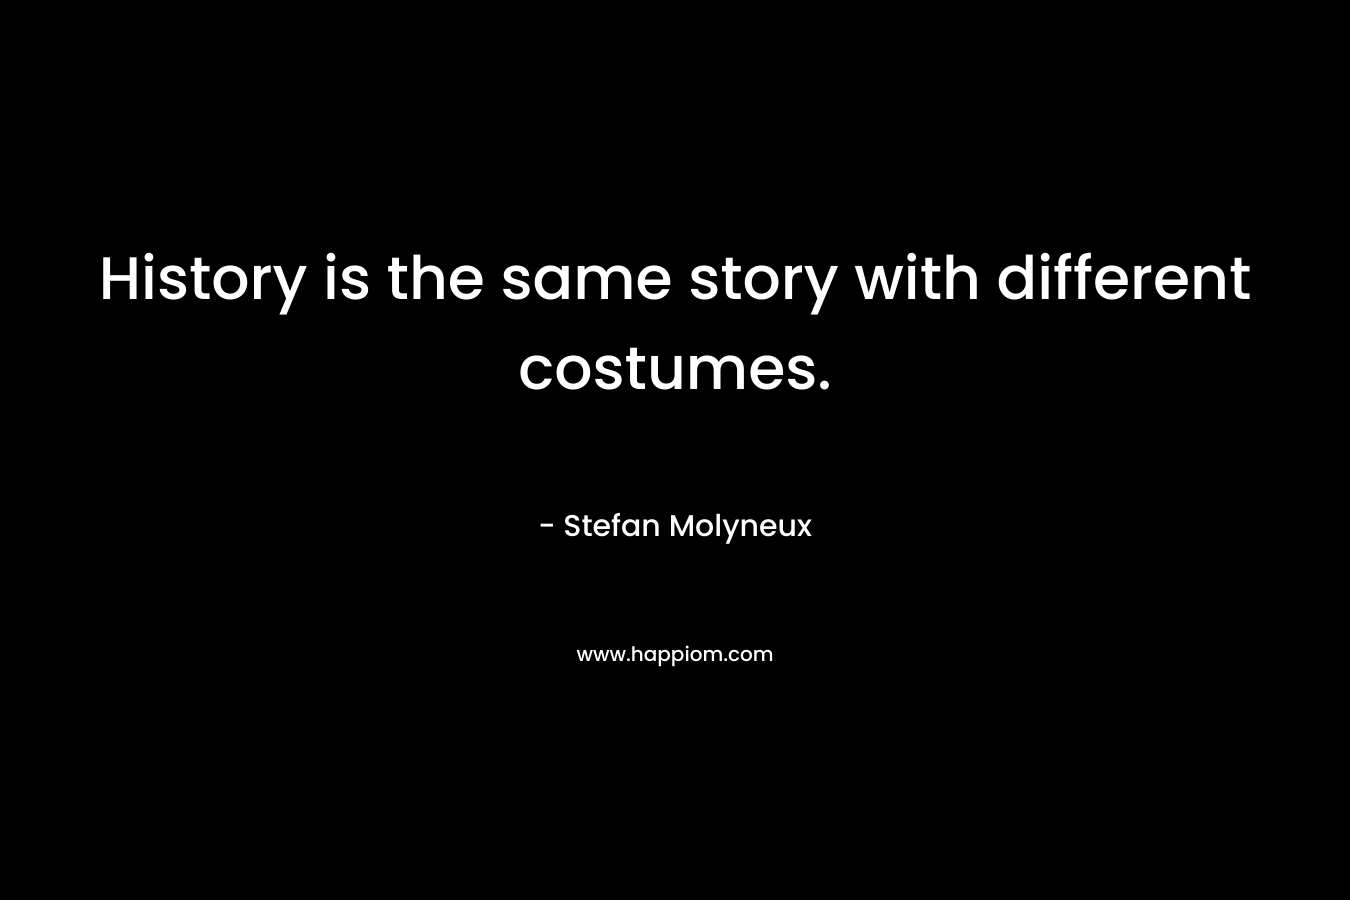 History is the same story with different costumes. – Stefan Molyneux